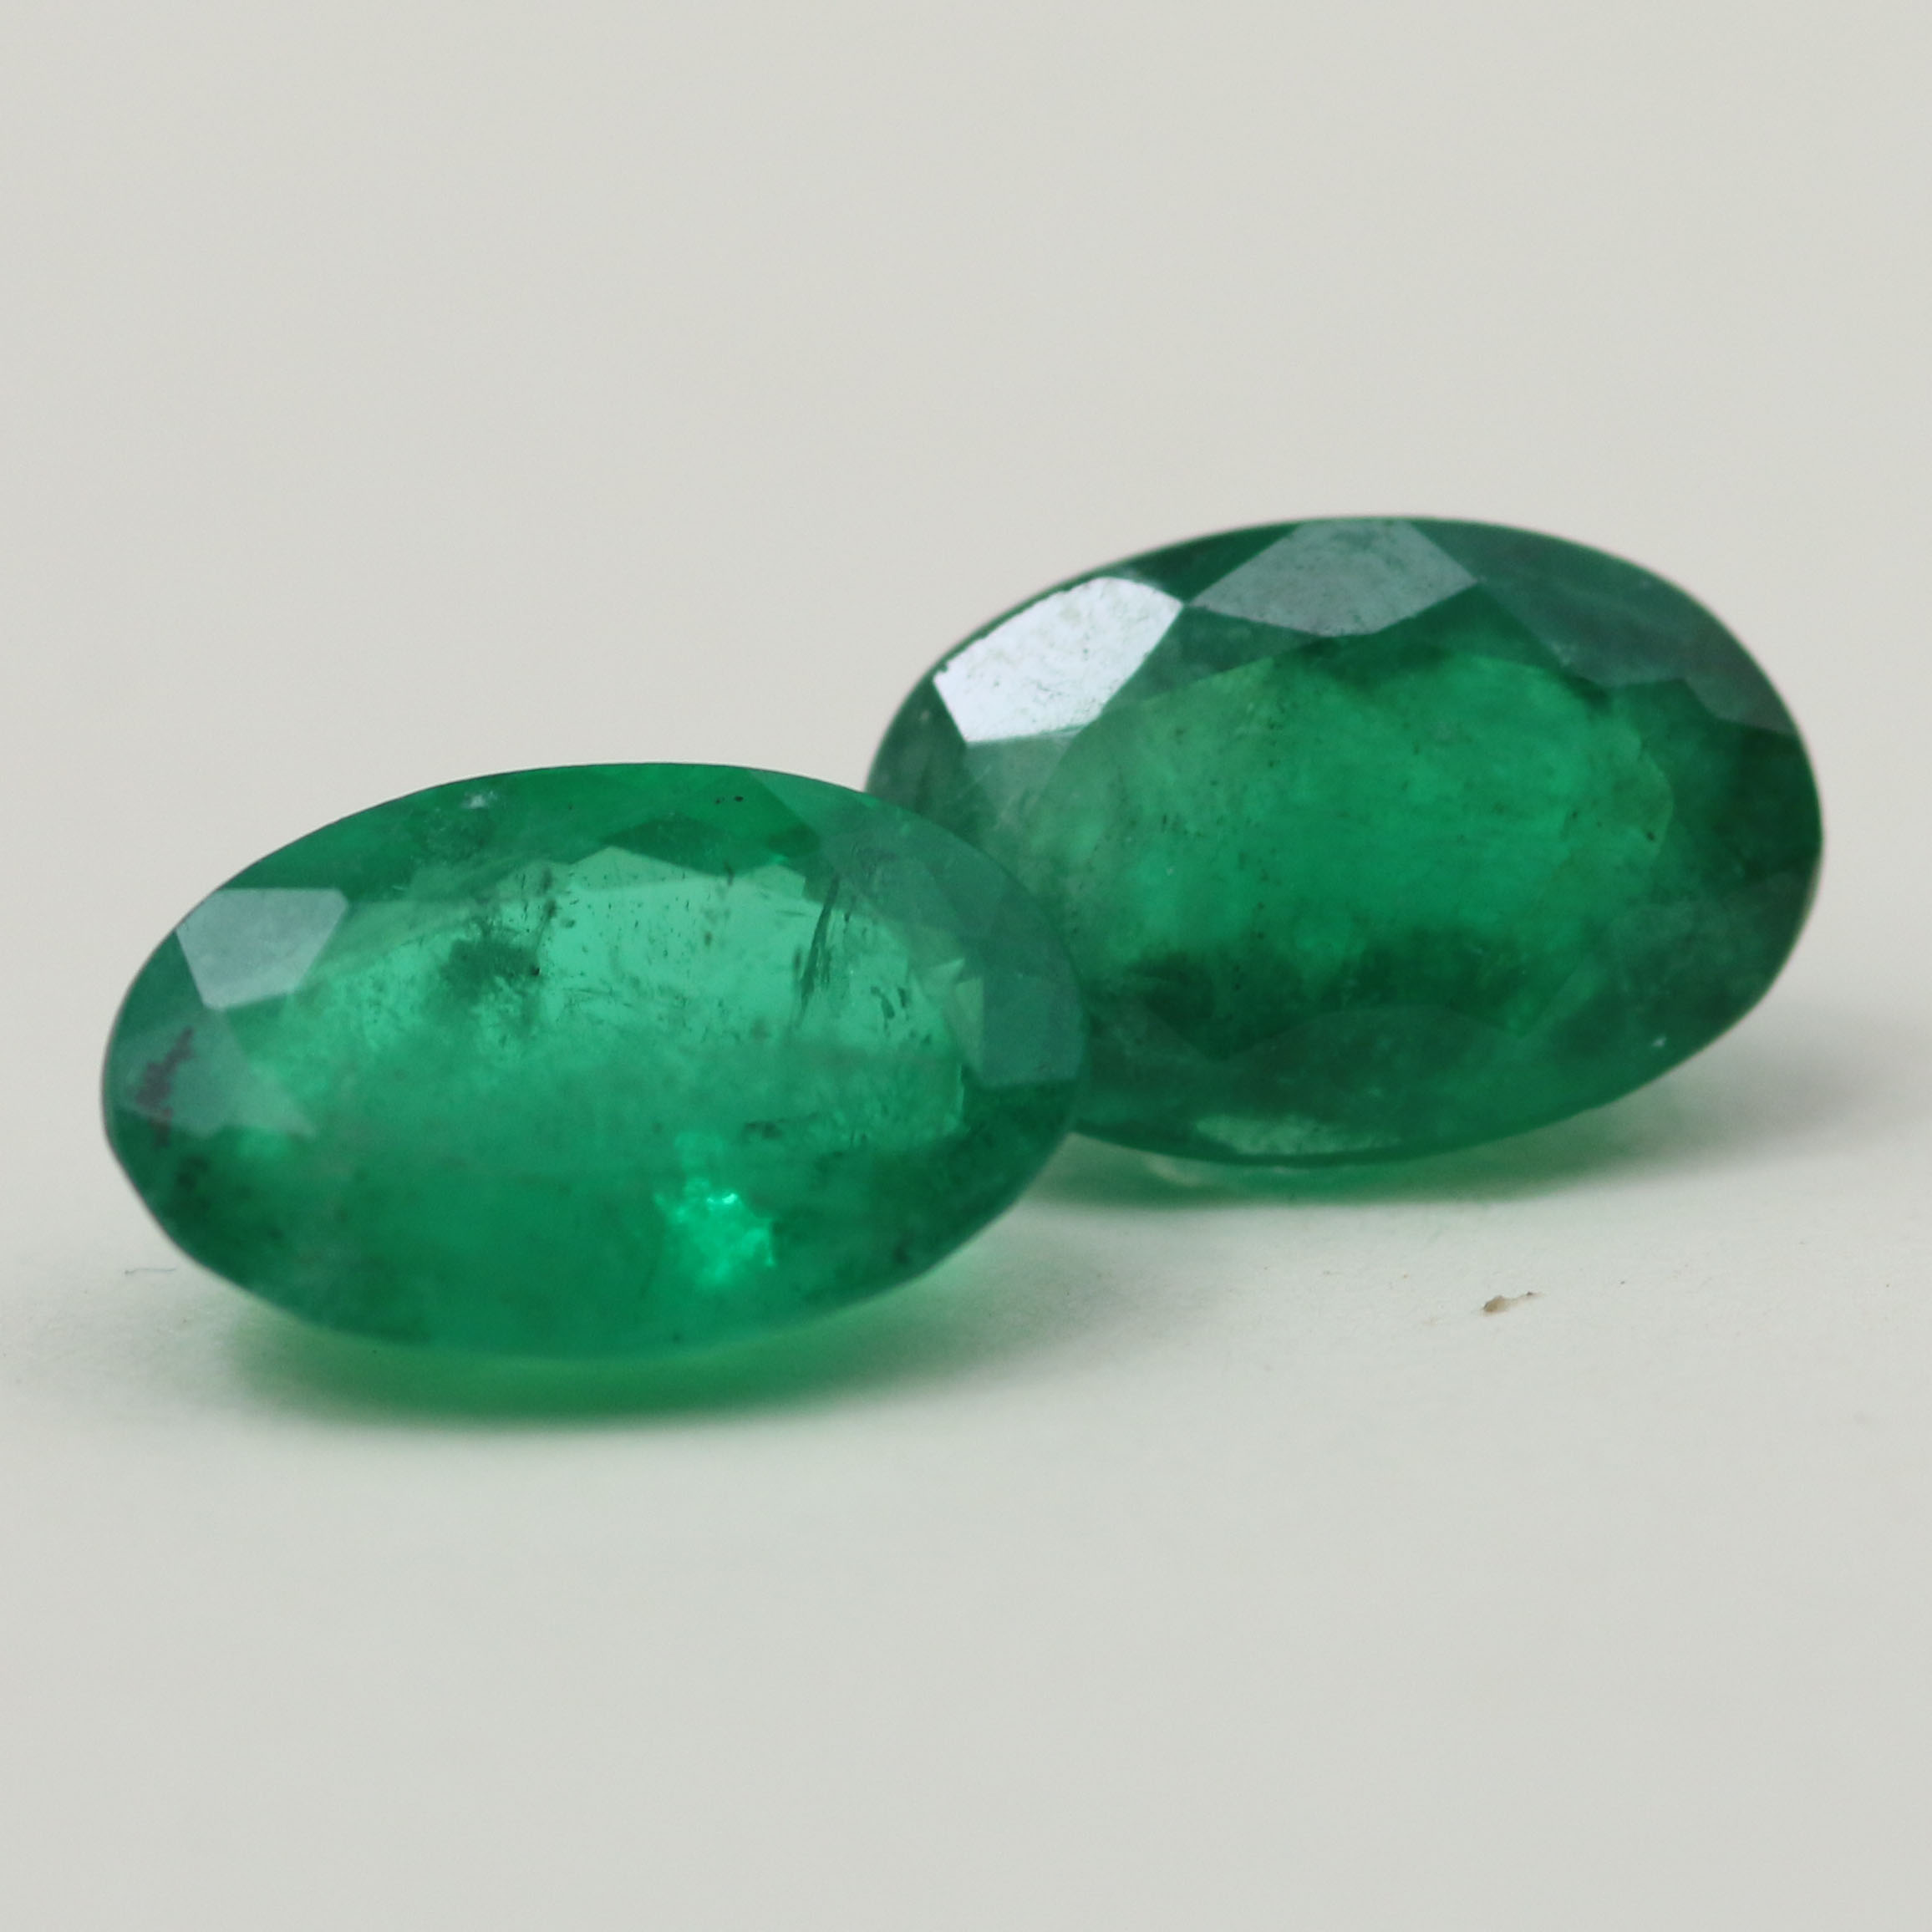 EMERALD PAIR 10X6.8 OVAL 3.74CT